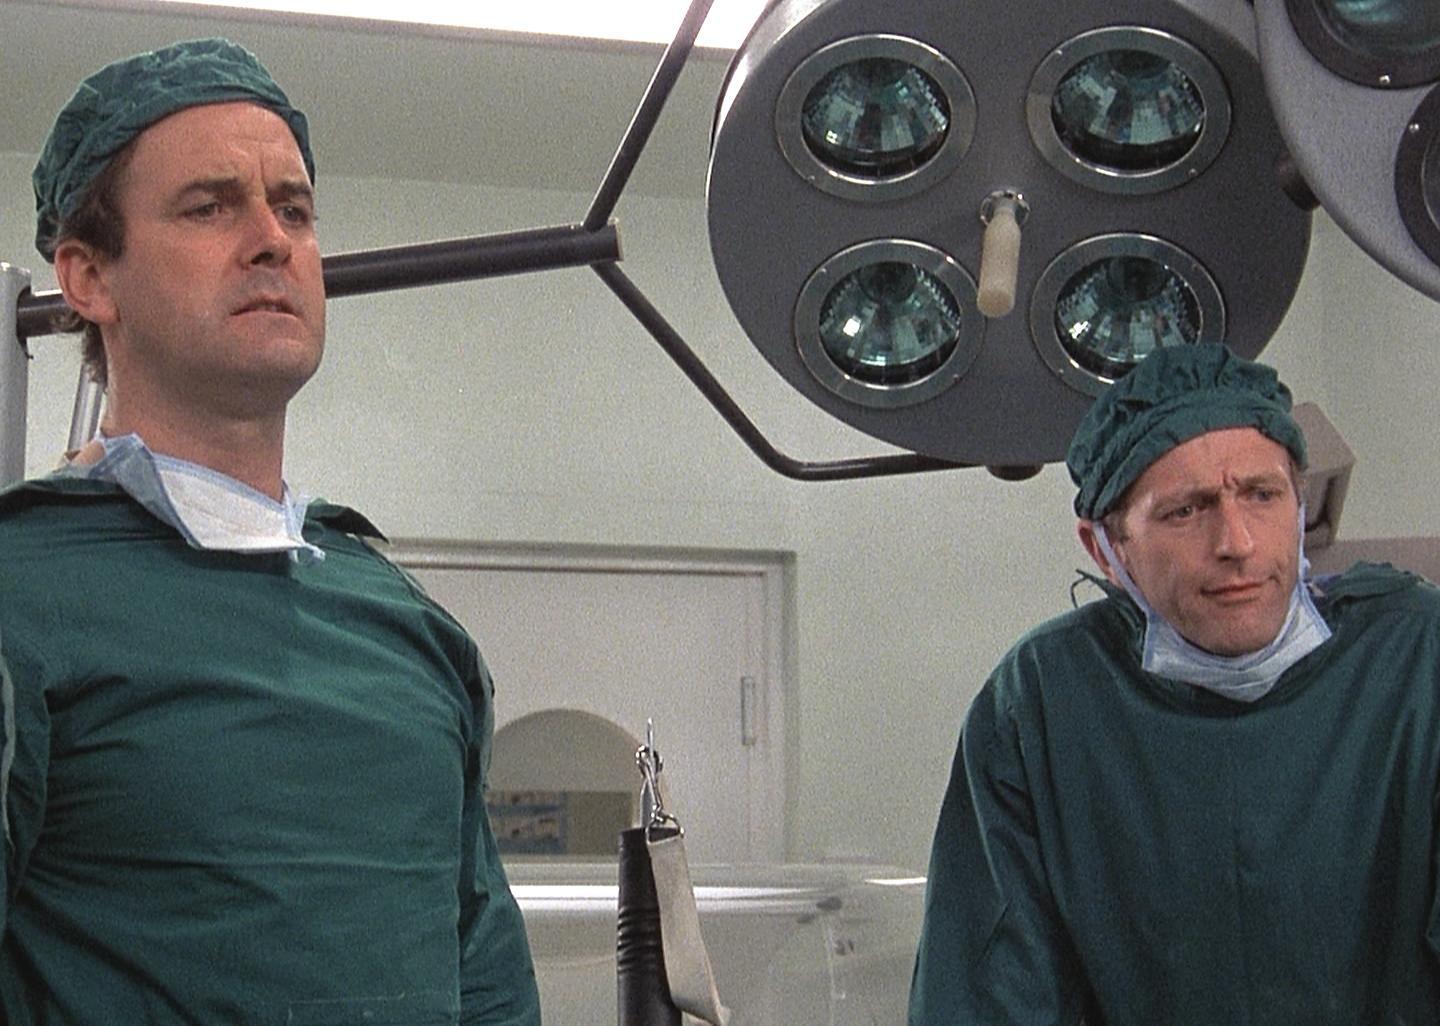 John Cleese and Graham Chapman as surgeons in the operating room.